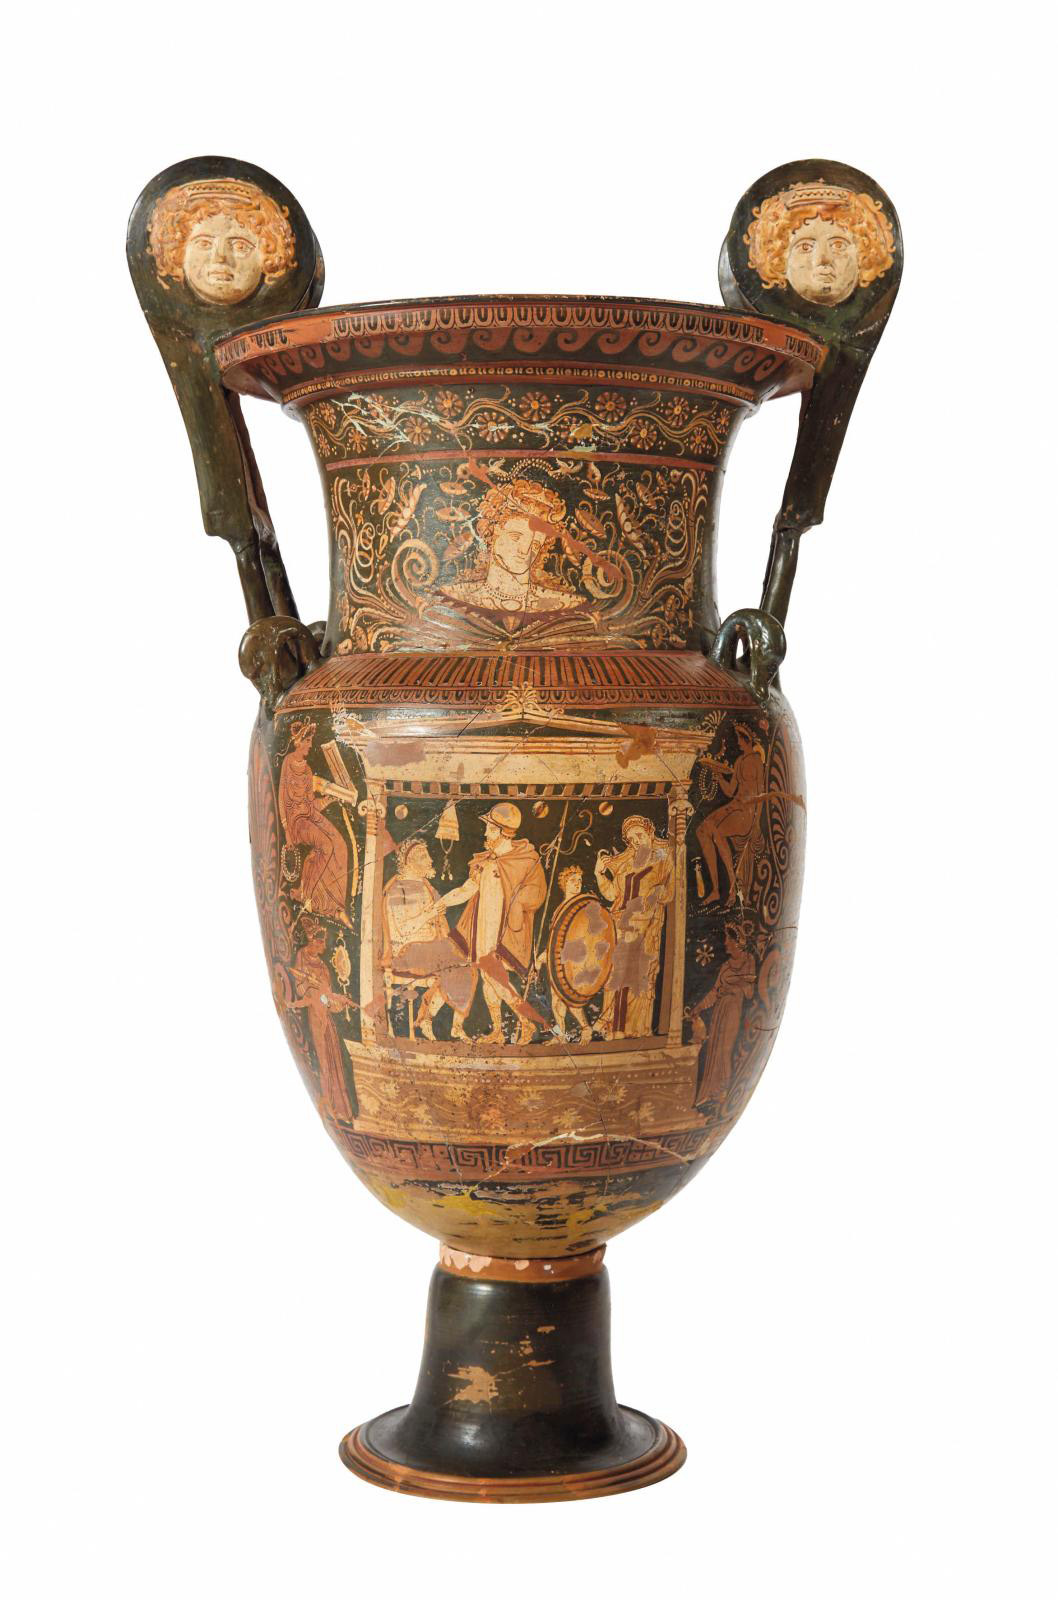 Fables and Figures in a Late 4th-Century Apulian Vase